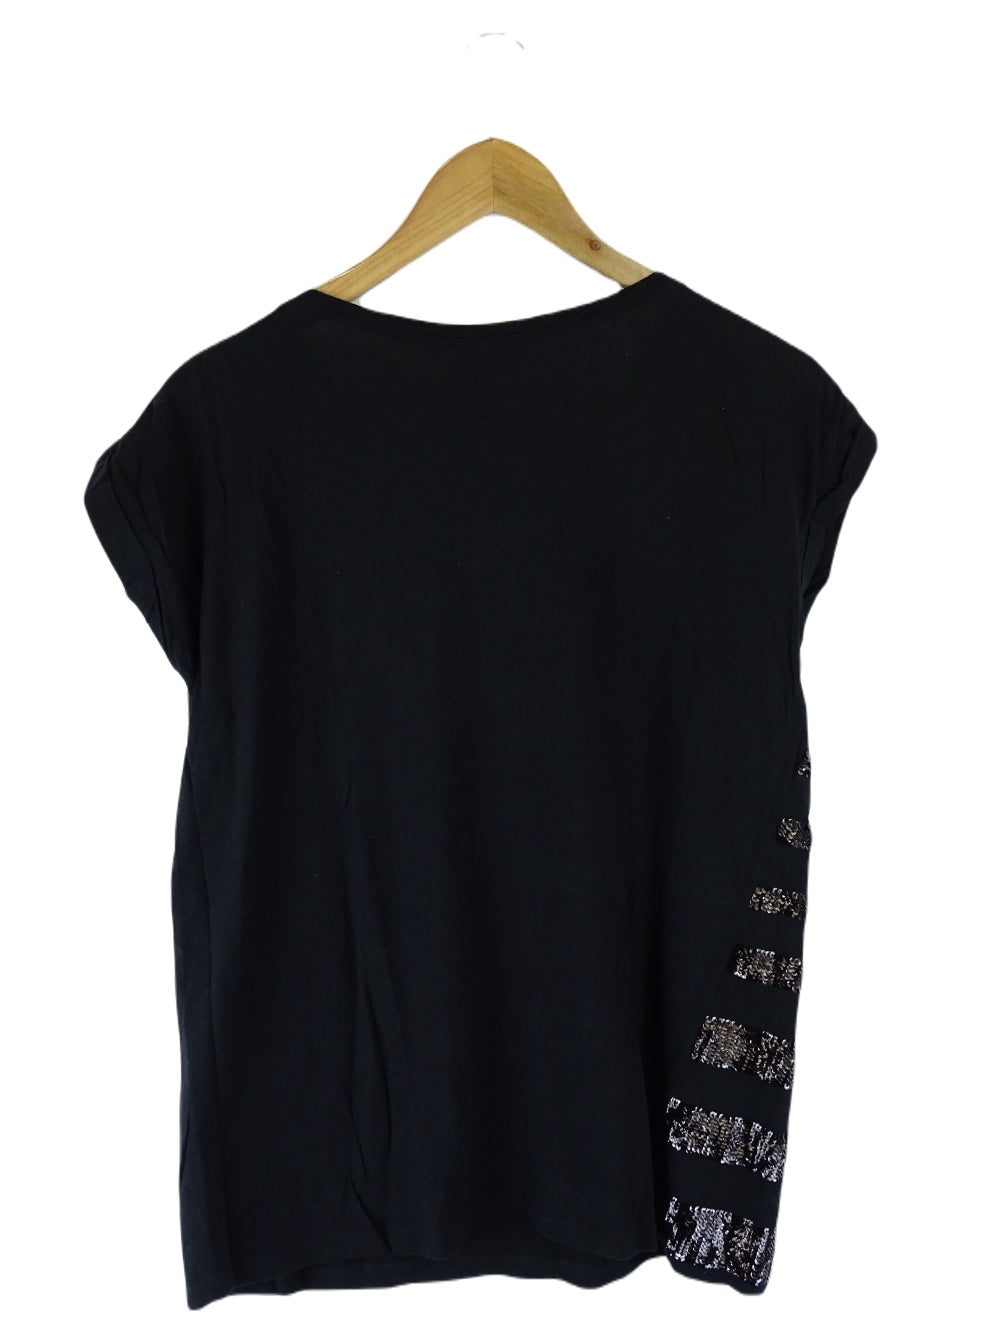 Seed Heritage Black Sequin T-shirt S